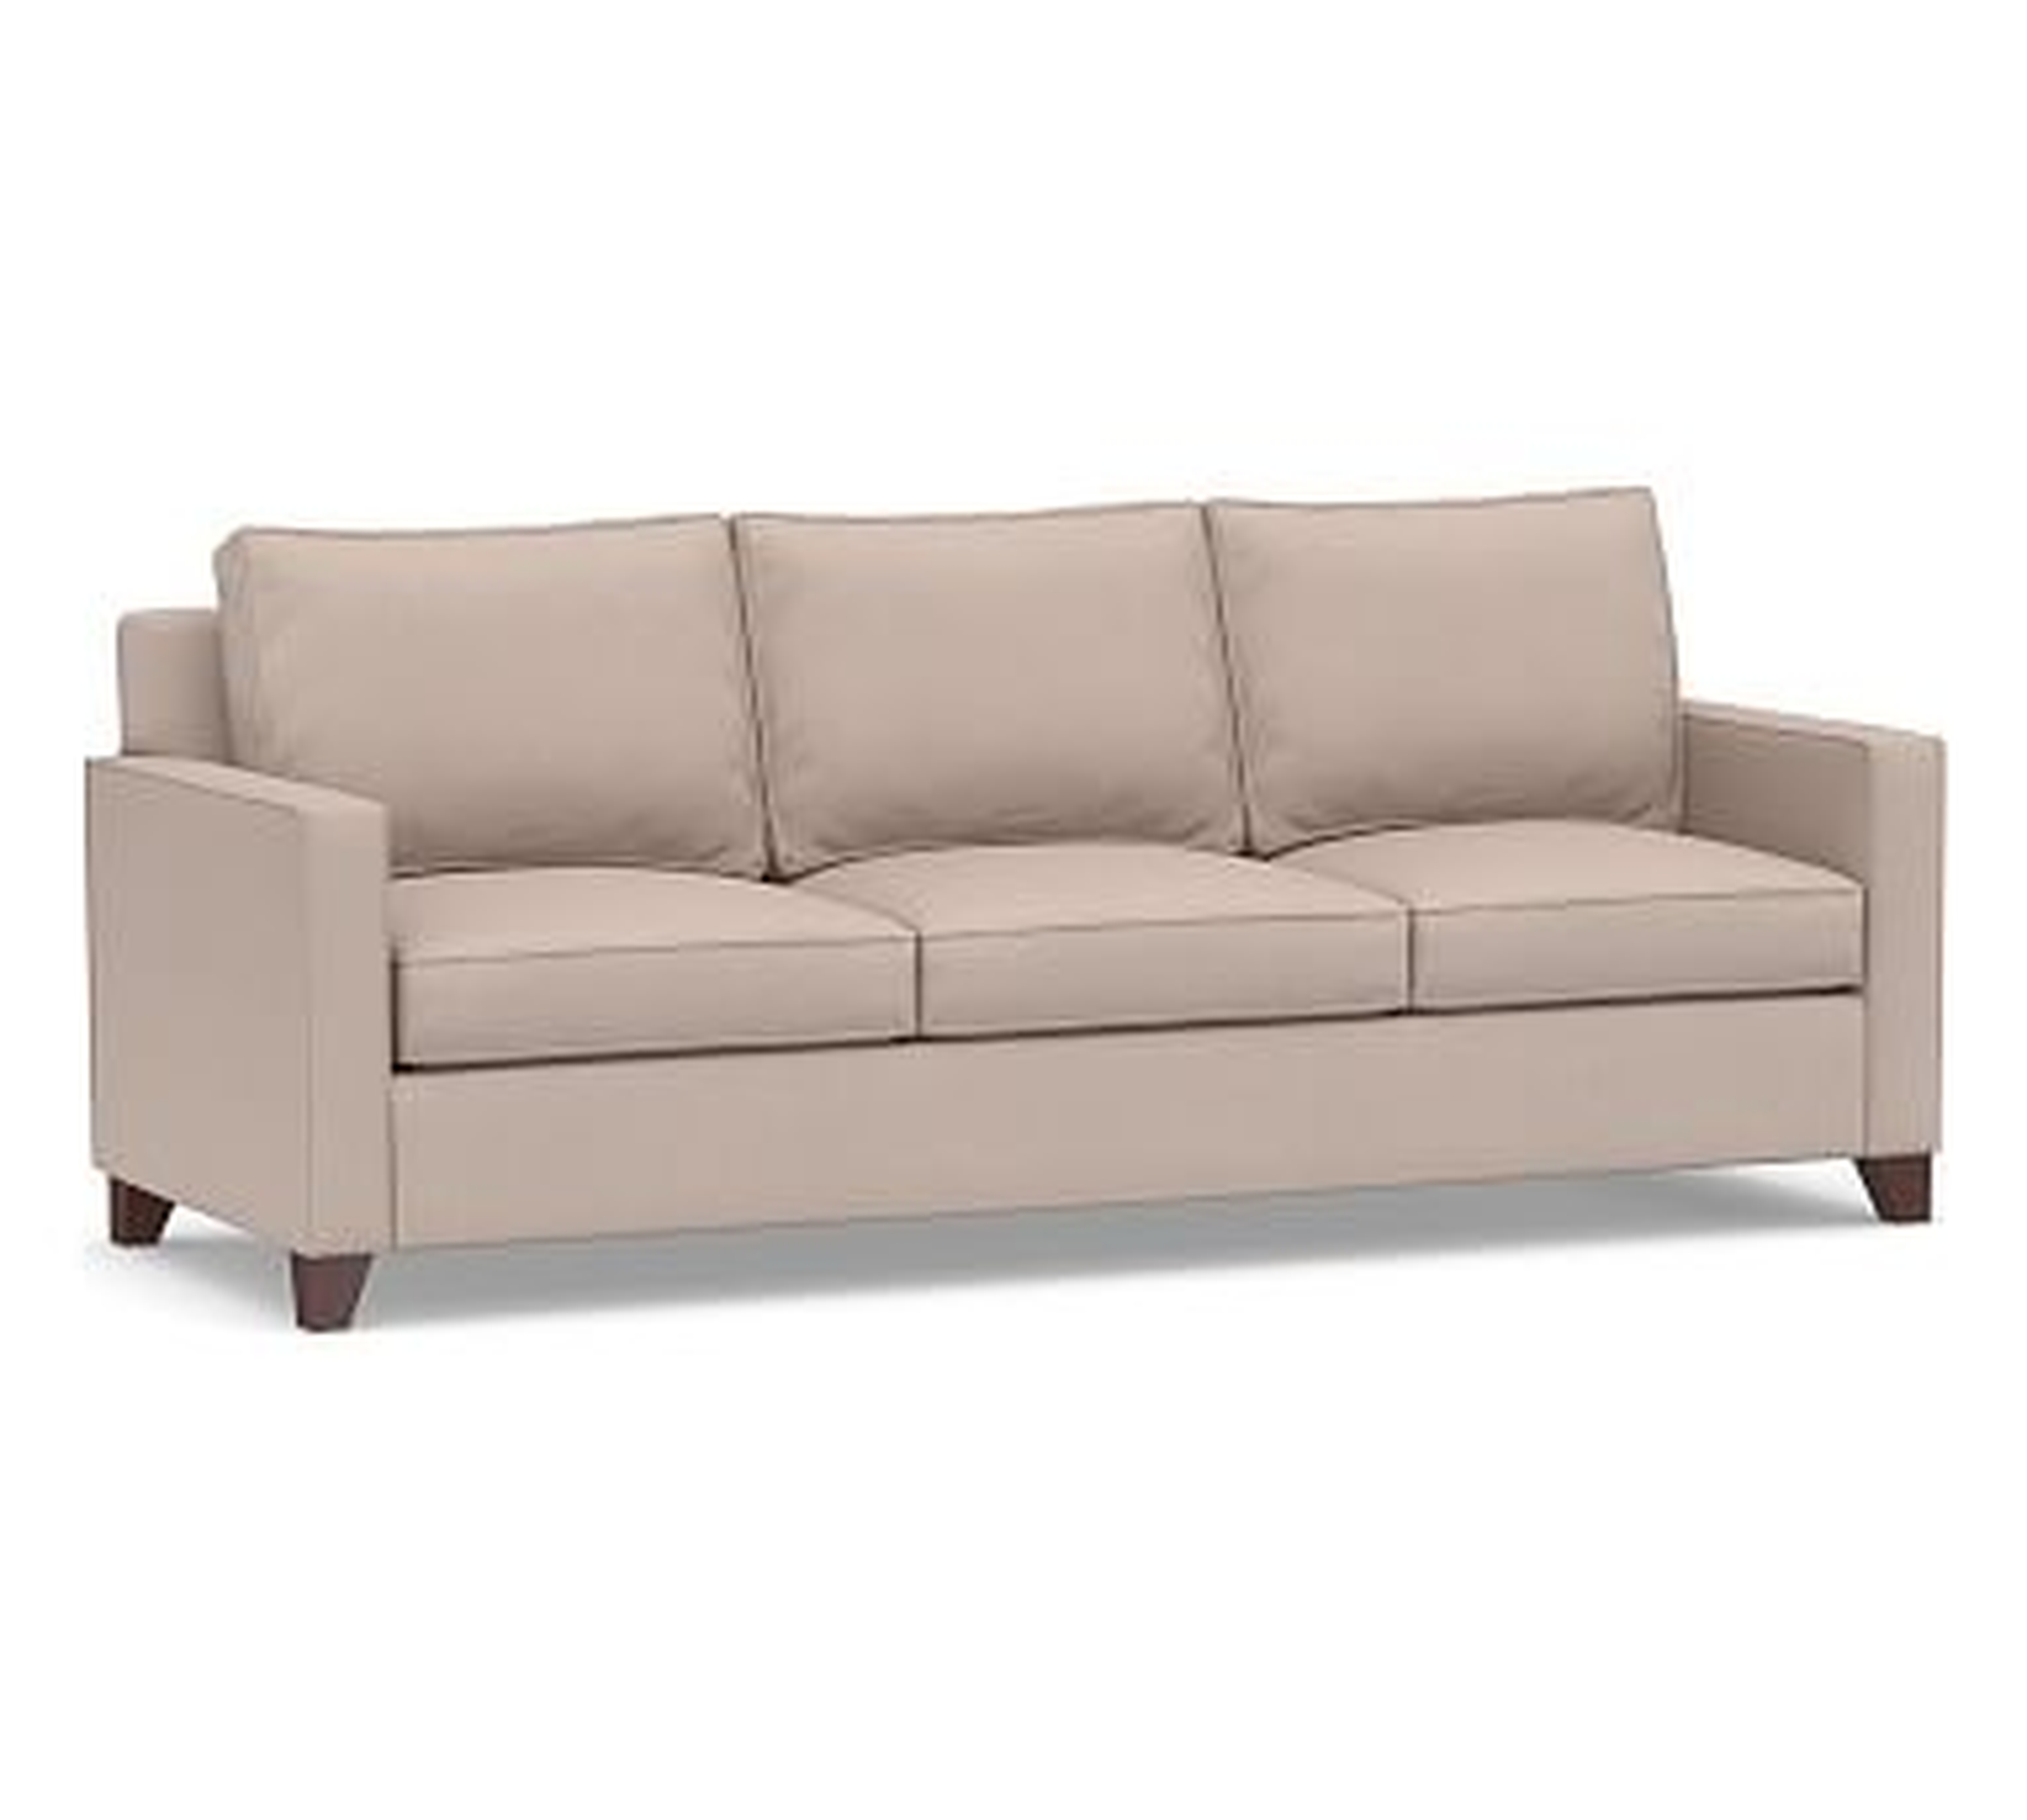 Cameron Square Arm Upholstered Grand Sofa 96" 3-Seater, Polyester Wrapped Cushions, Performance Heathered Tweed Desert - Pottery Barn